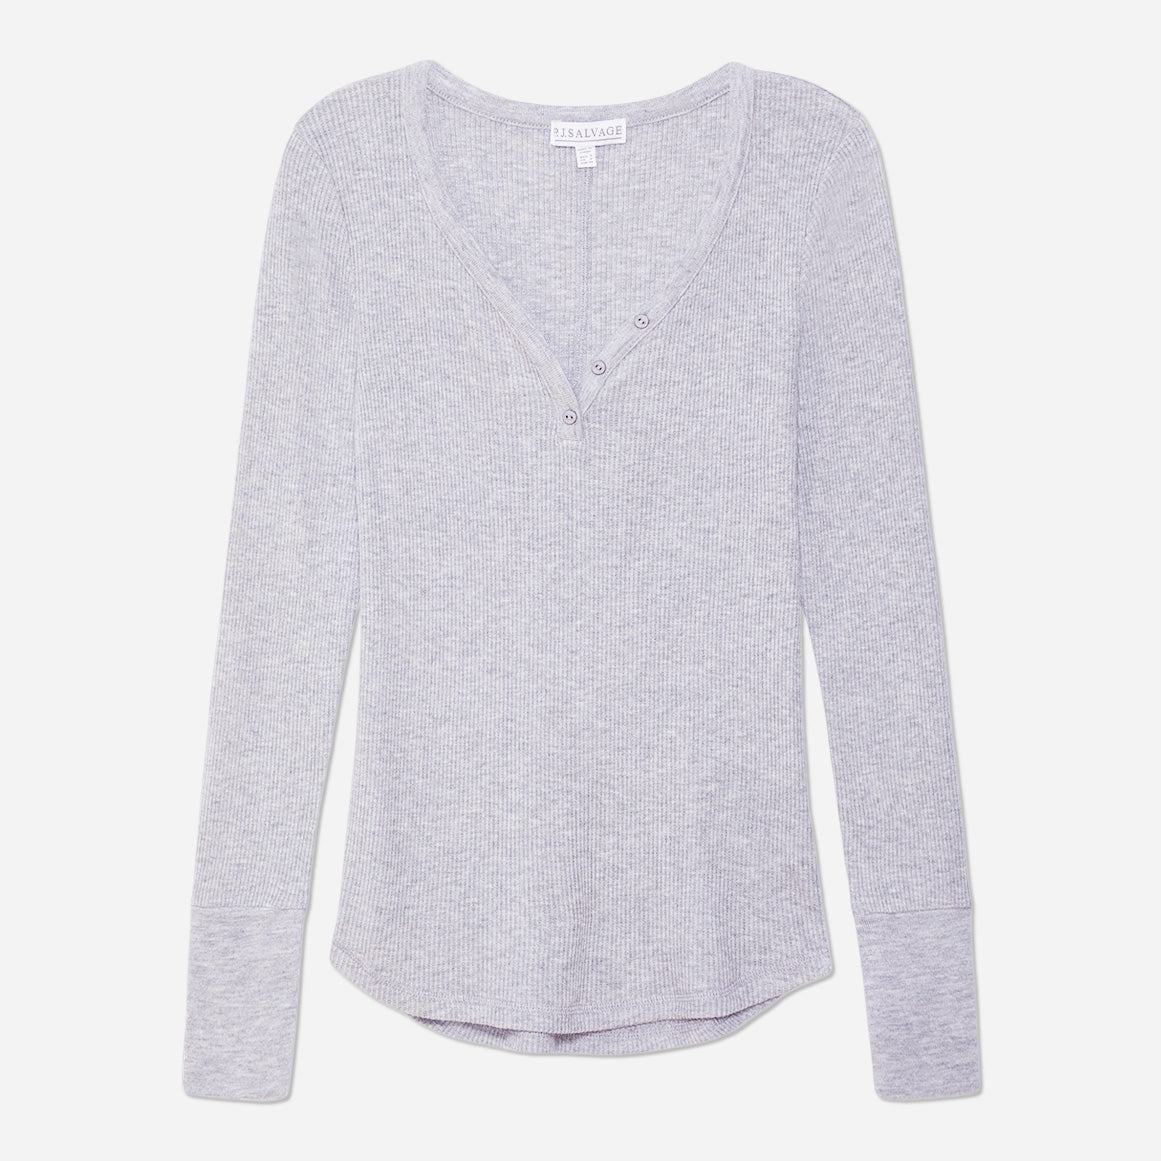 This long sleeve shirt has a cozy fit with a flattering scooped hemline to provide extra coverage. The feminine v-neckline shows off your natural beauty, making this lounge top a sophisticated choice for relaxing.